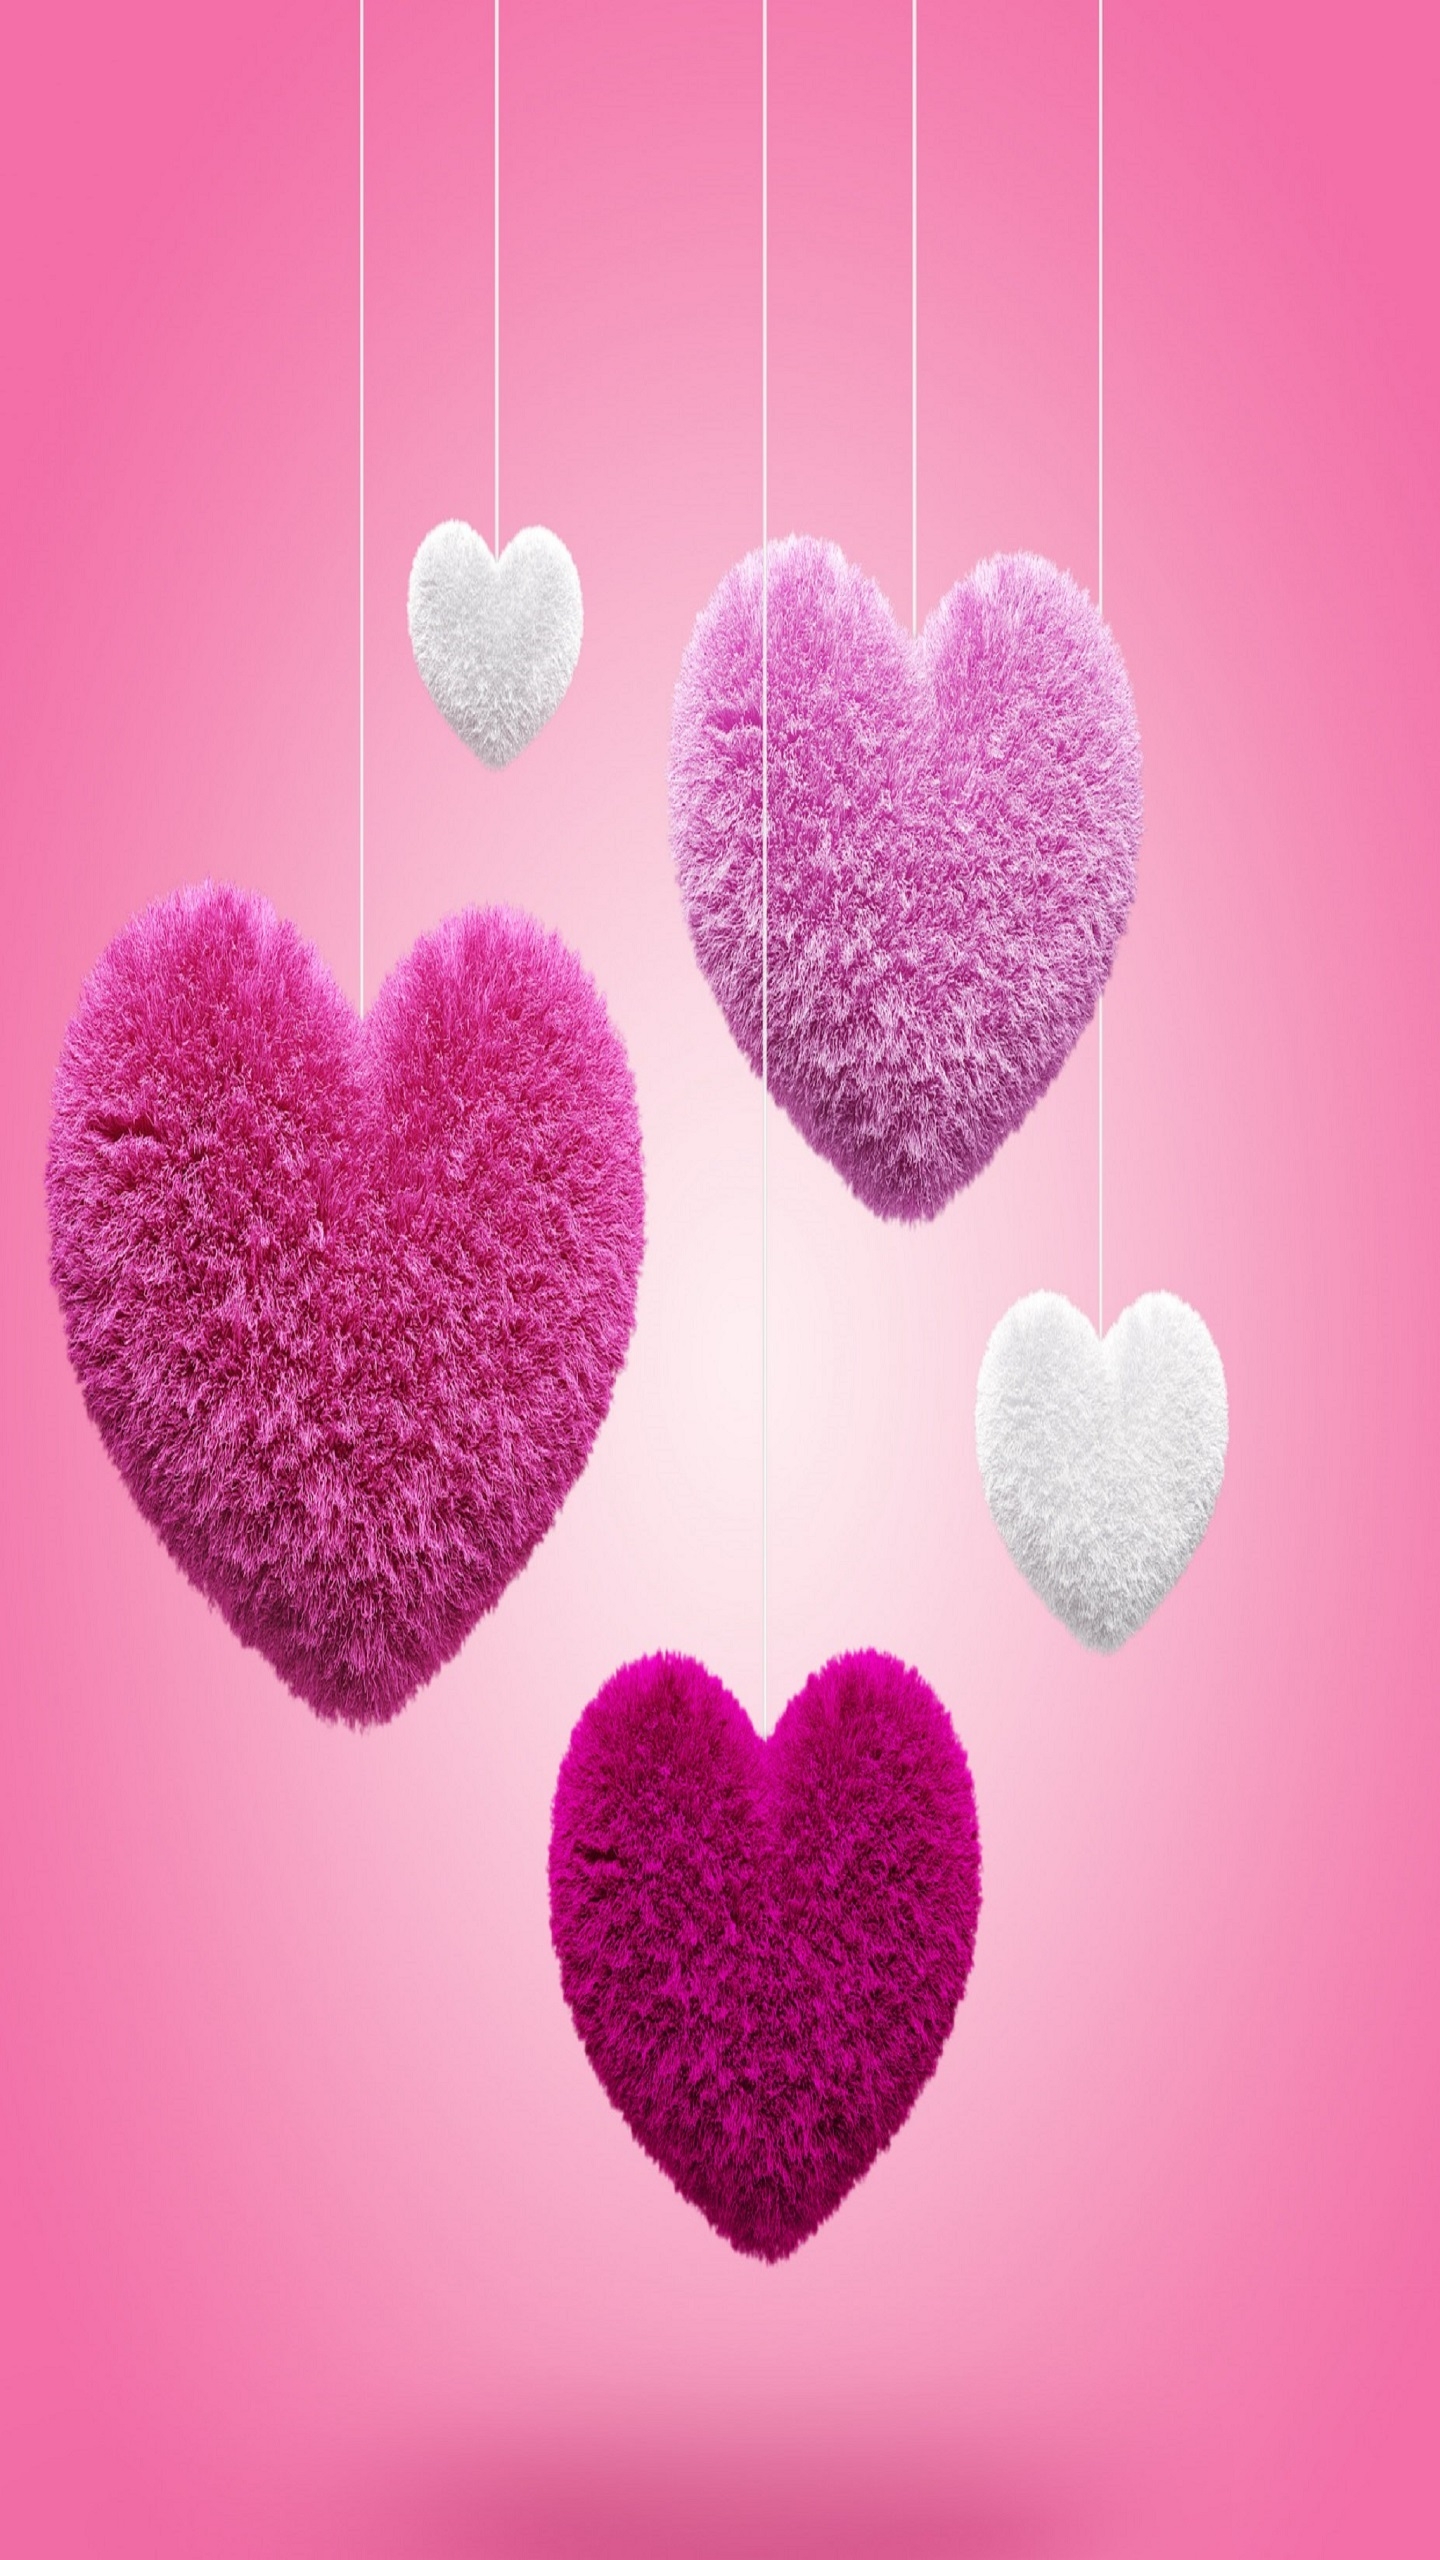 Fluffy Hearts for Samsung S7 & S7 Edge resolution